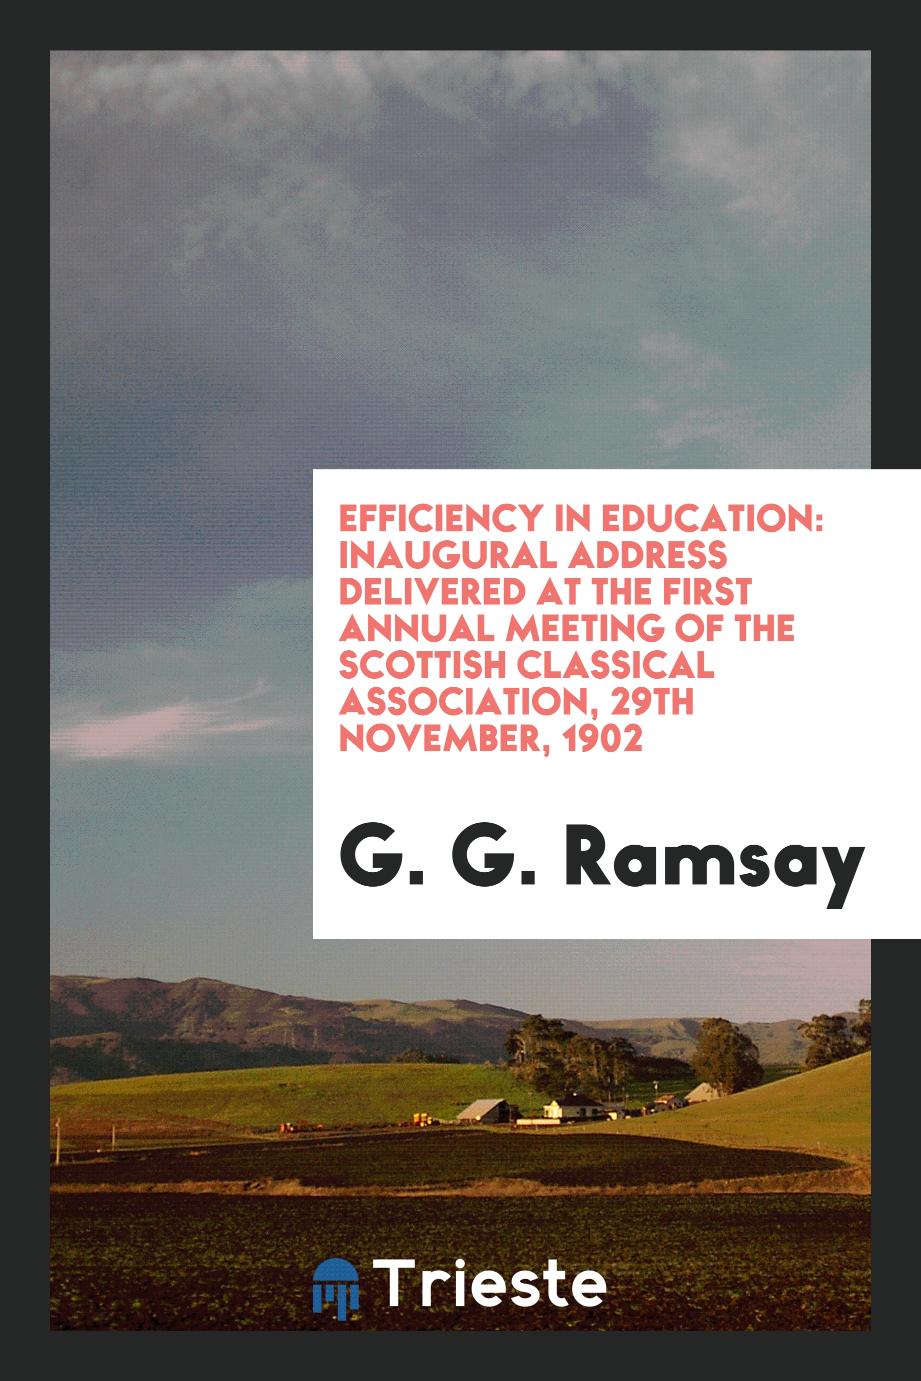 Efficiency in Education: Inaugural Address Delivered at the First Annual Meeting of the Scottish Classical Association, 29th November, 1902